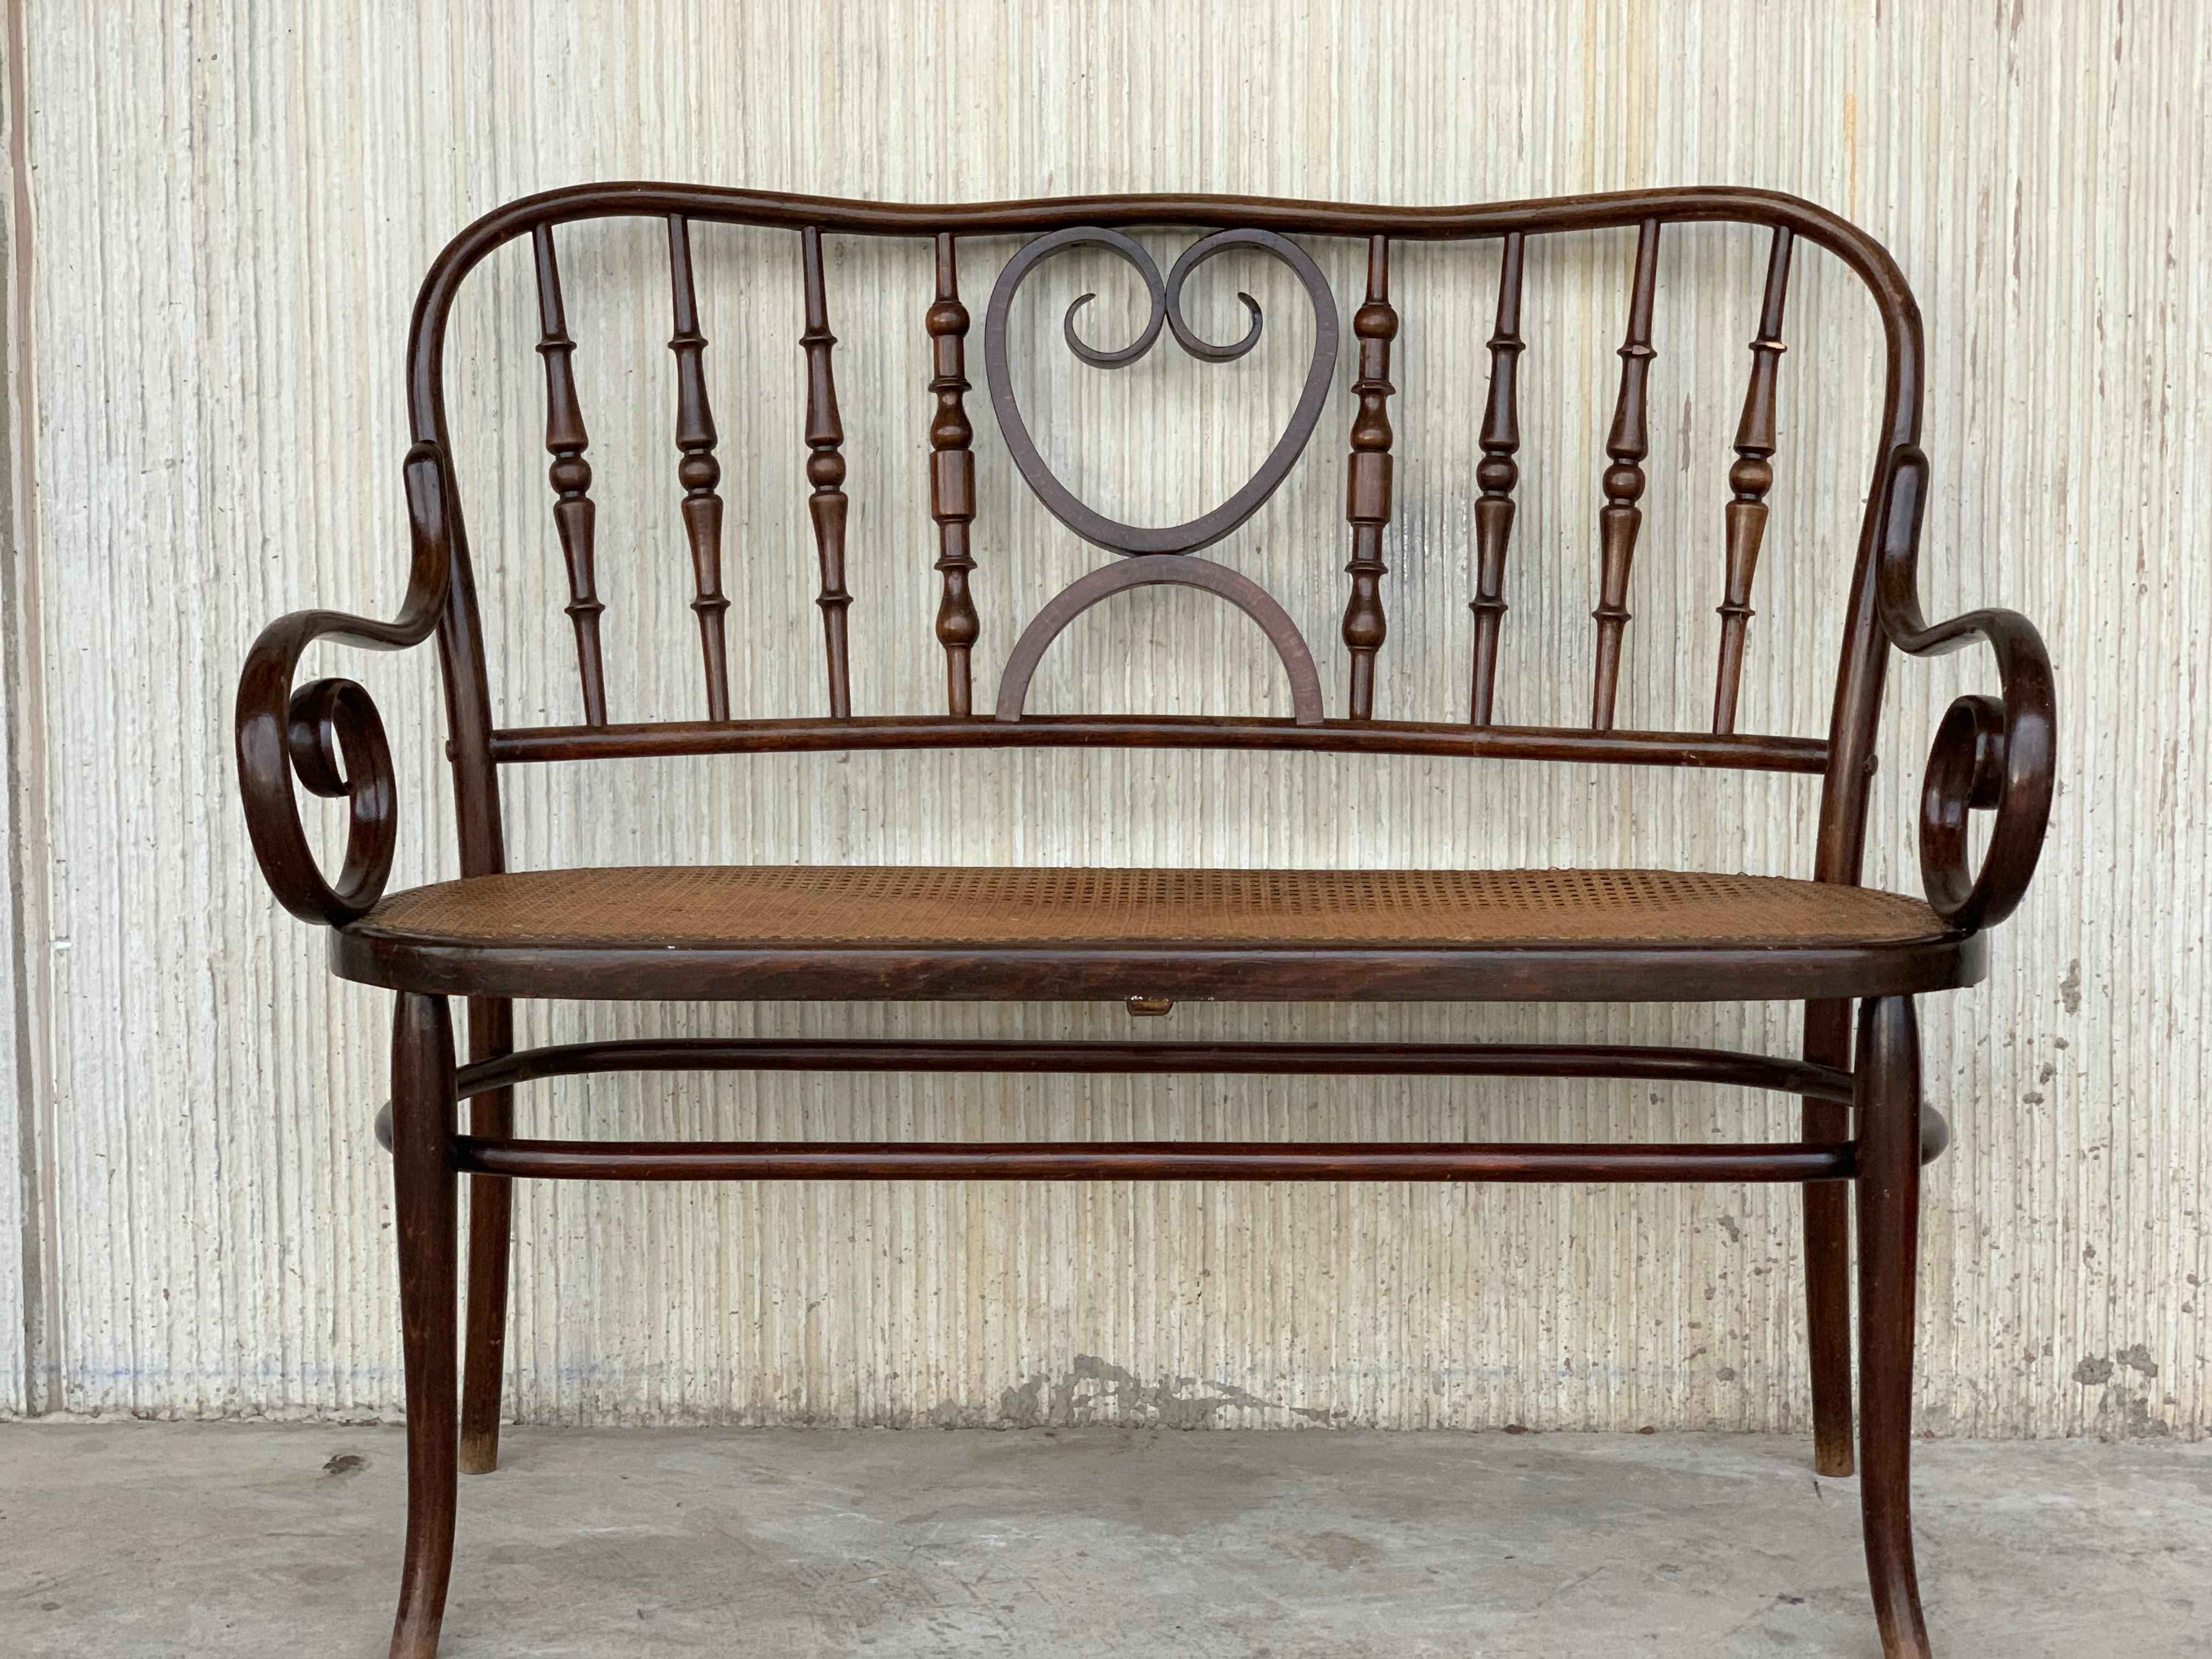 20th Century Bentwood Sofa in the Thonet Style, circa 1925, Caned Seat In Good Condition For Sale In Miami, FL